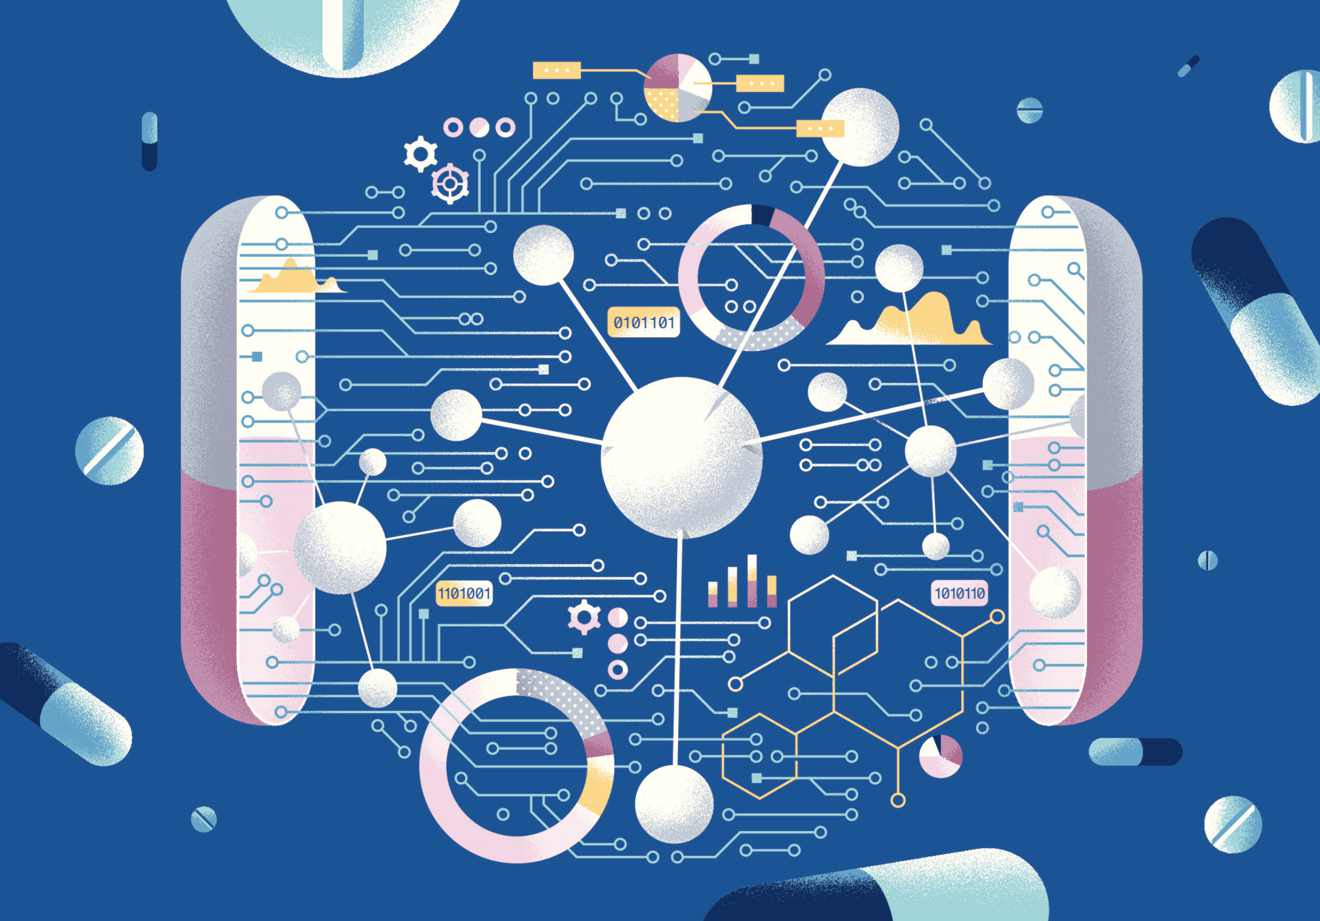 Top Companies Using A.I. In Drug Discovery And Development